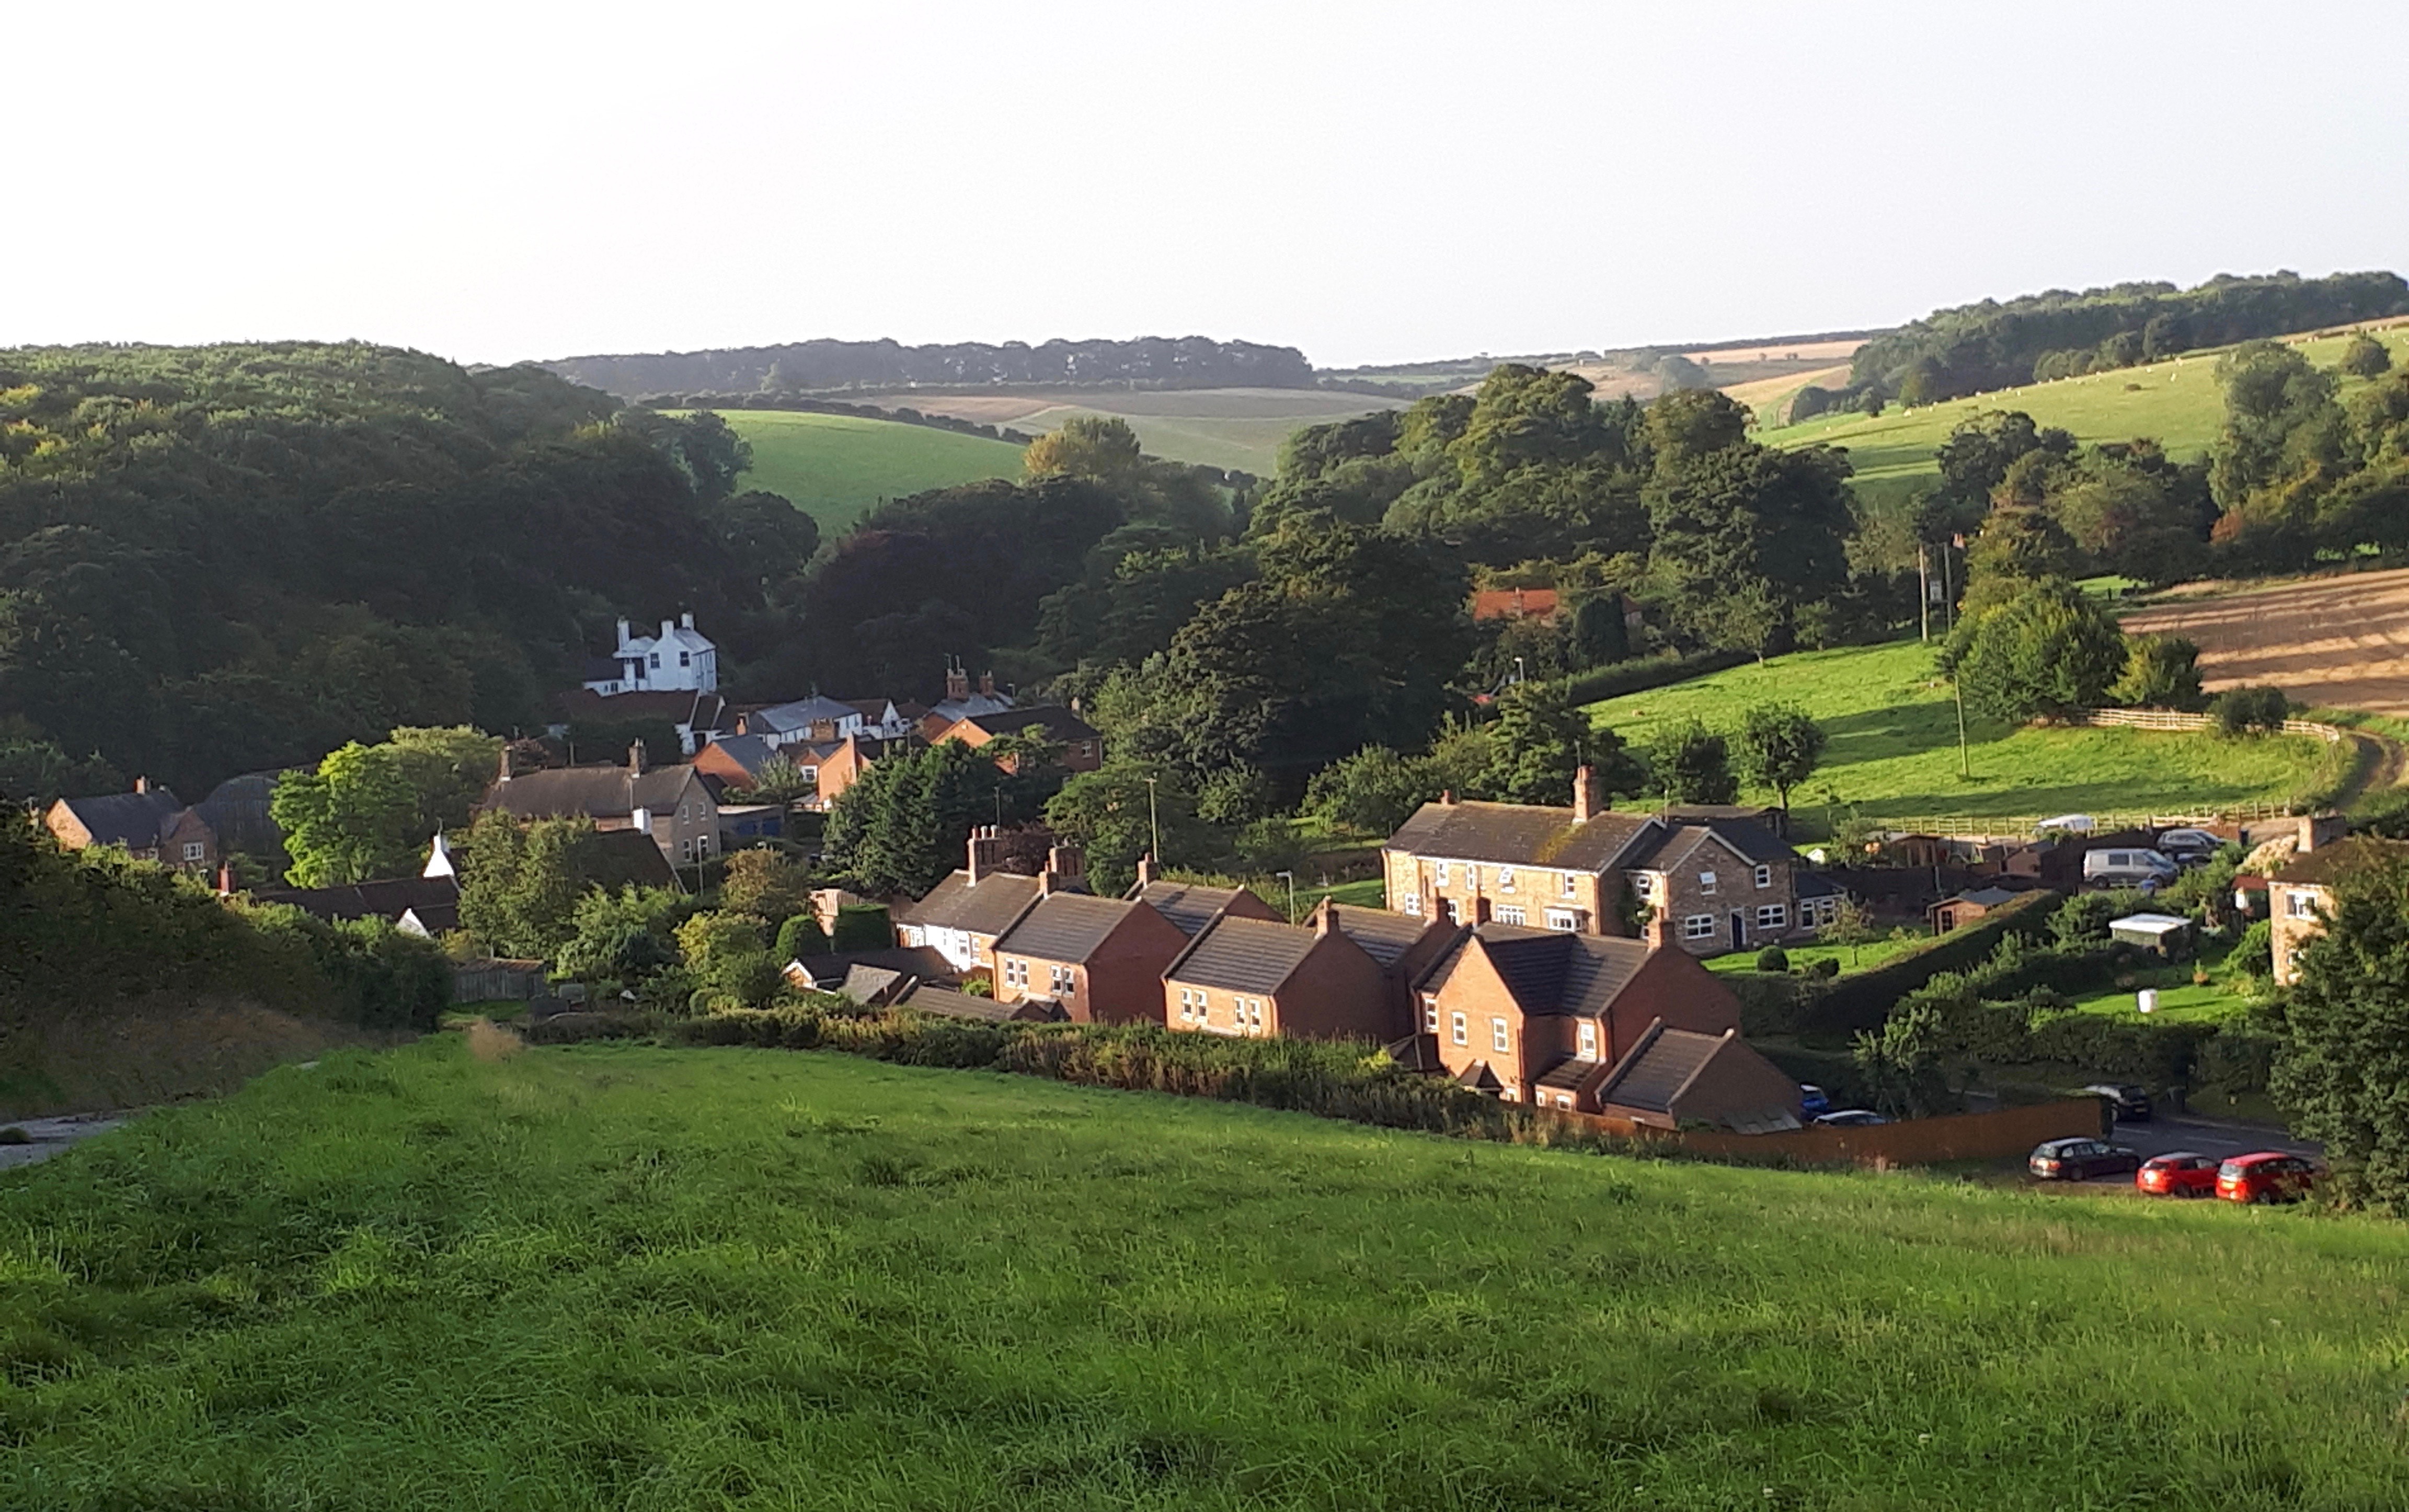 A picture of the village from the hill above